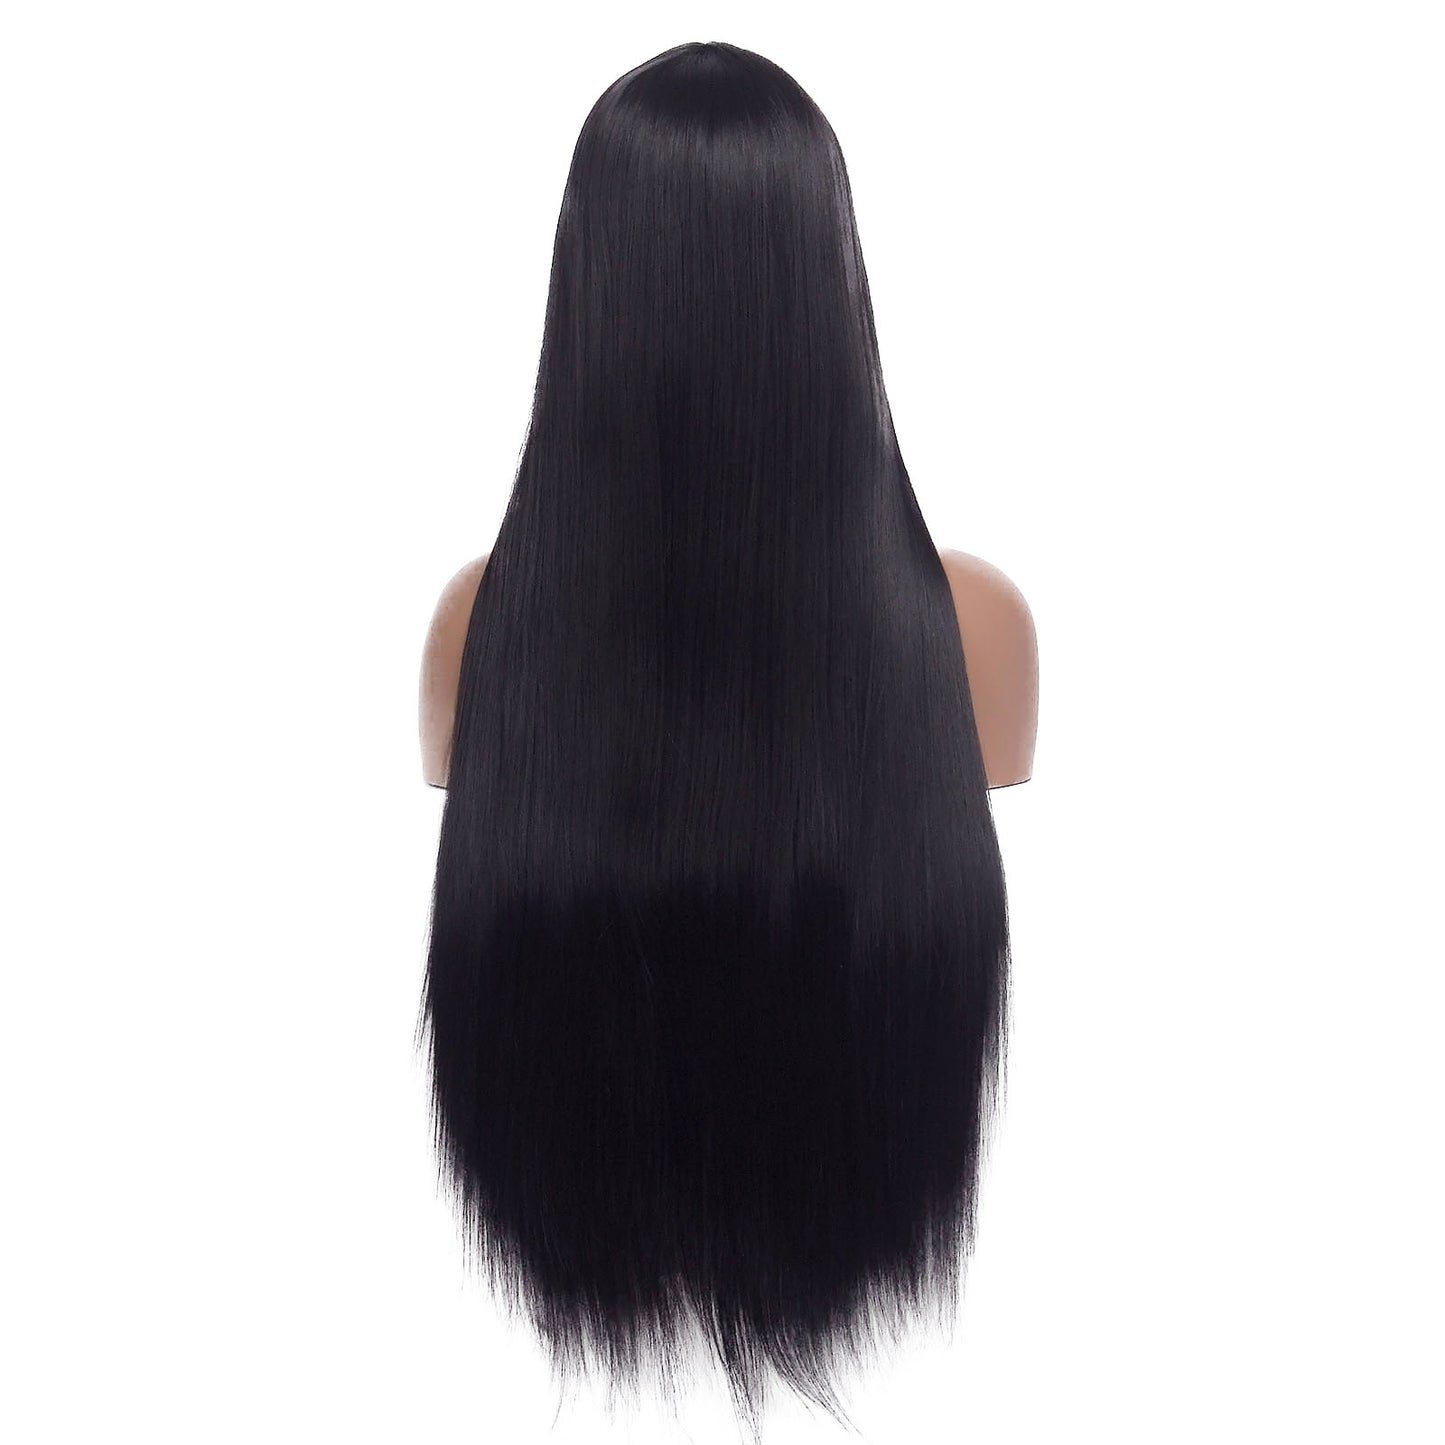 LINGDORA Long Straight Black Wig Middle Part Natural Looking